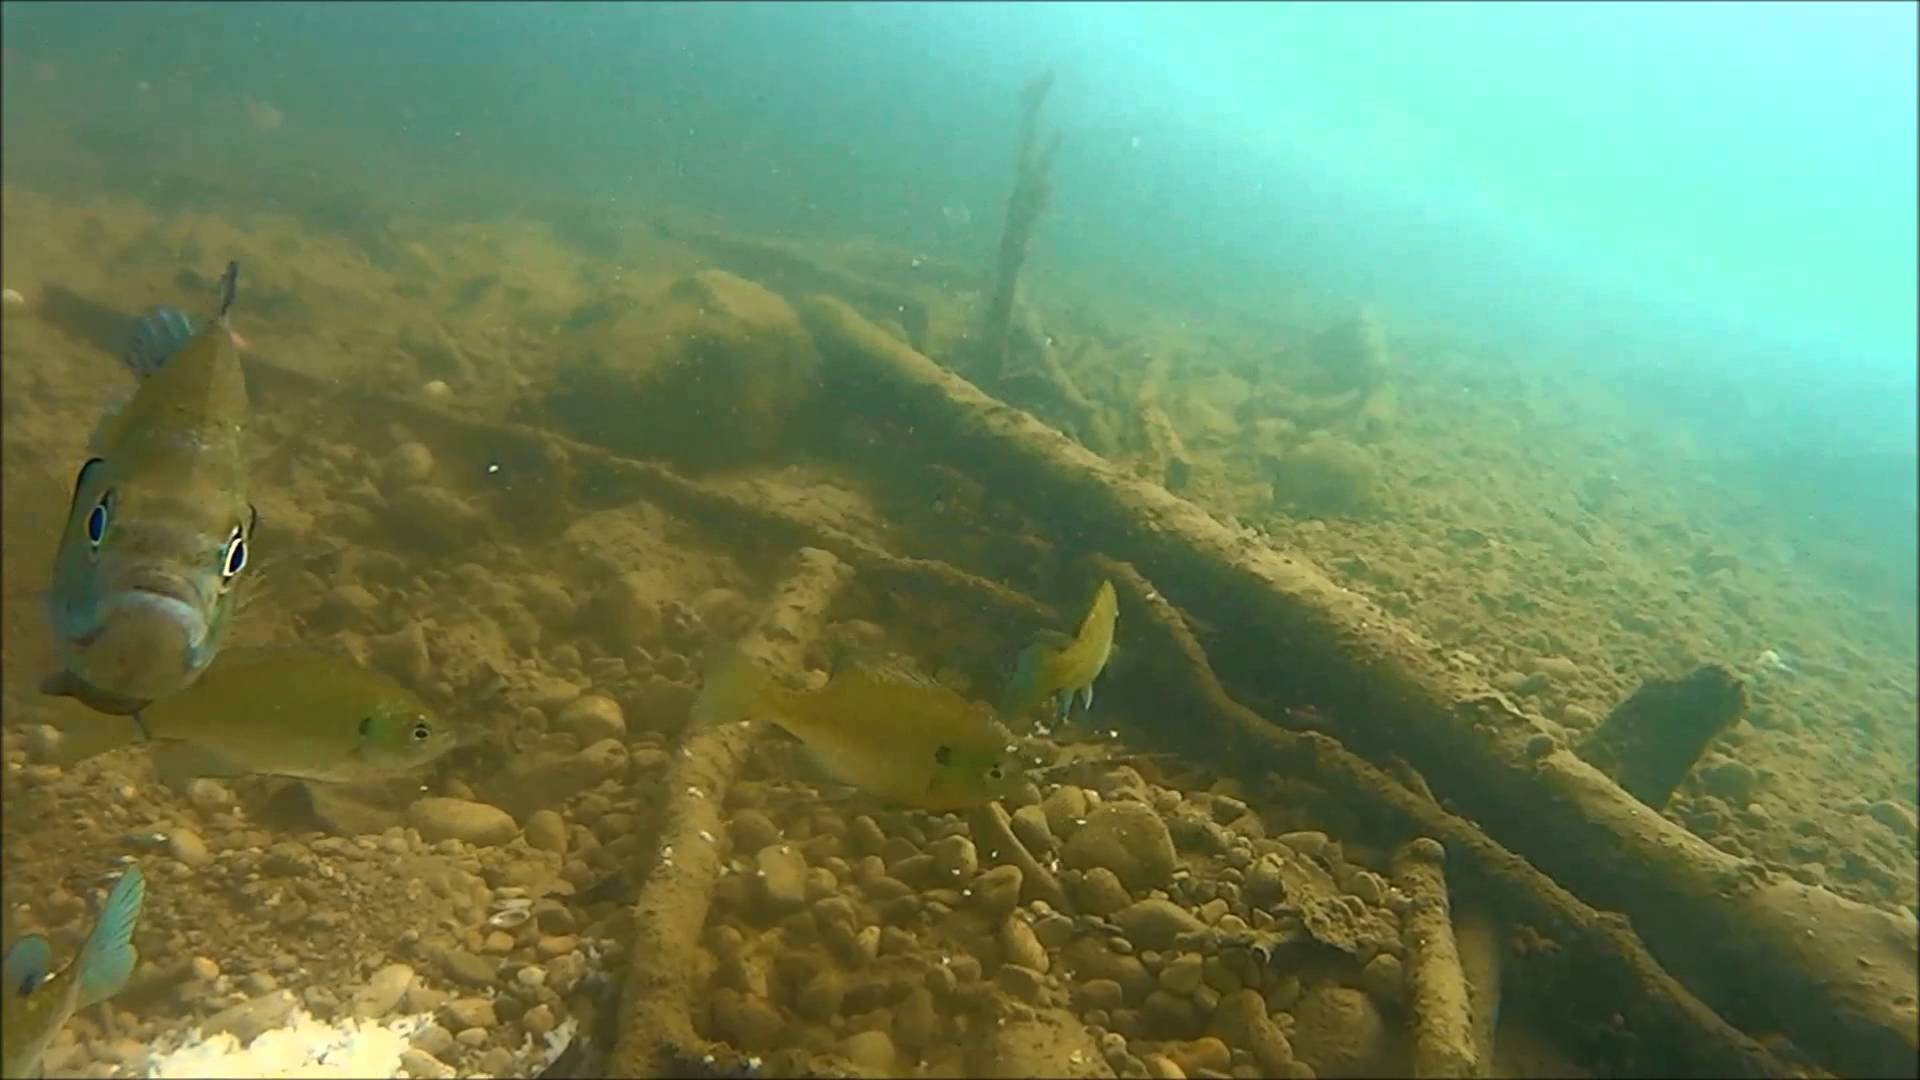 Underwater Camera in the Gravel Pit - YouTube